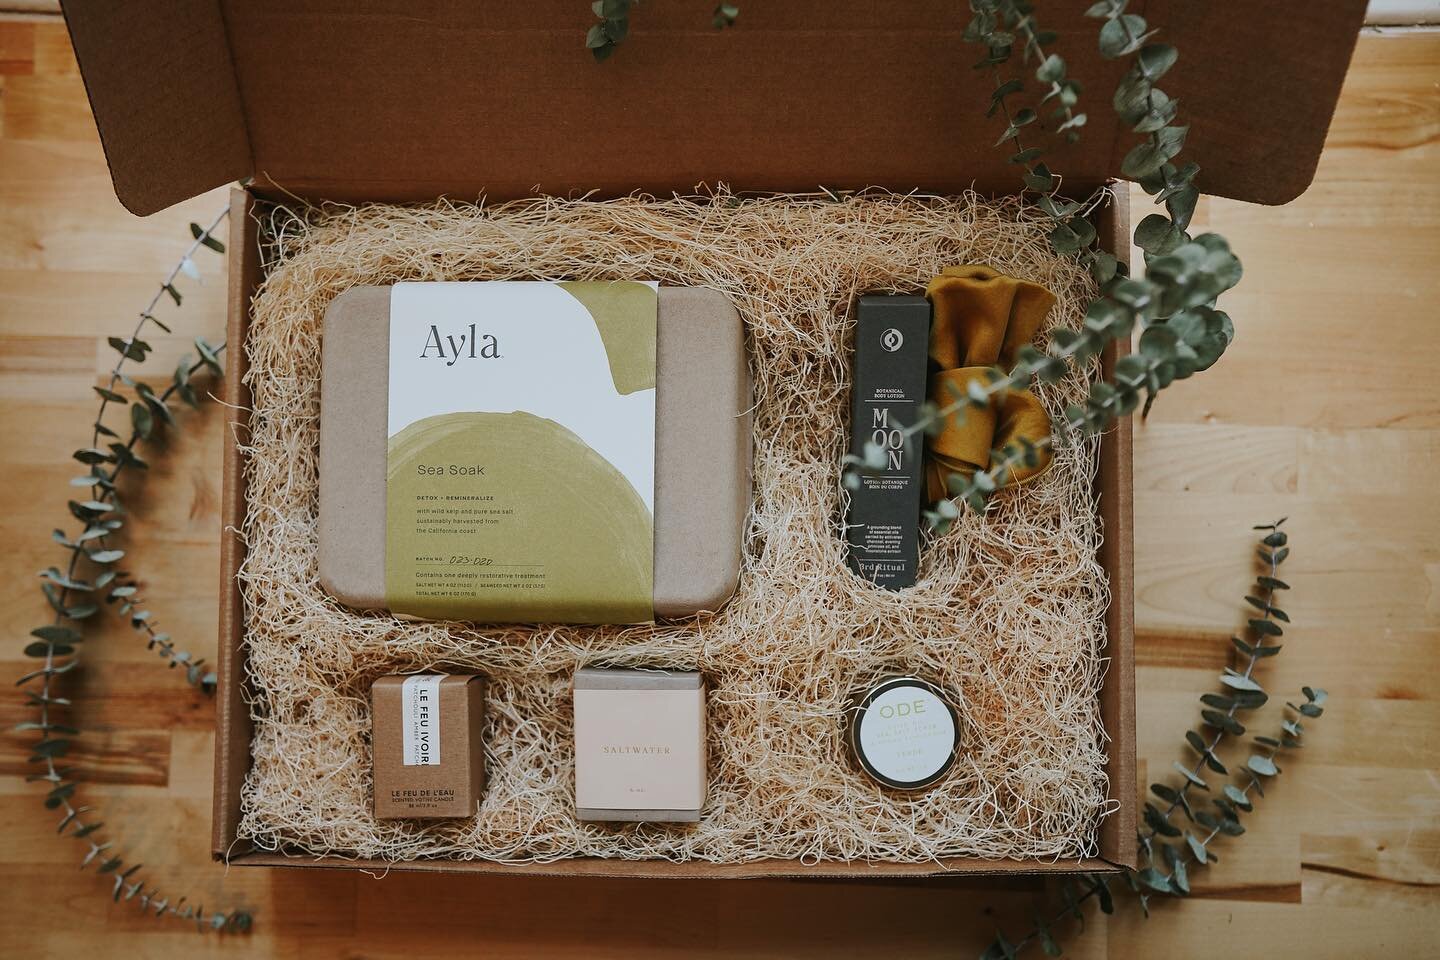 Restore, relax, remineralize, and invoke the four elements of ocean, earth, fire, and sky with this sustainable set.
⠀⠀⠀⠀⠀⠀⠀⠀⠀
@aylabeauty Seaweed Ritual, designed to  be a profound way to witness the power of individual ingredients in their natural 